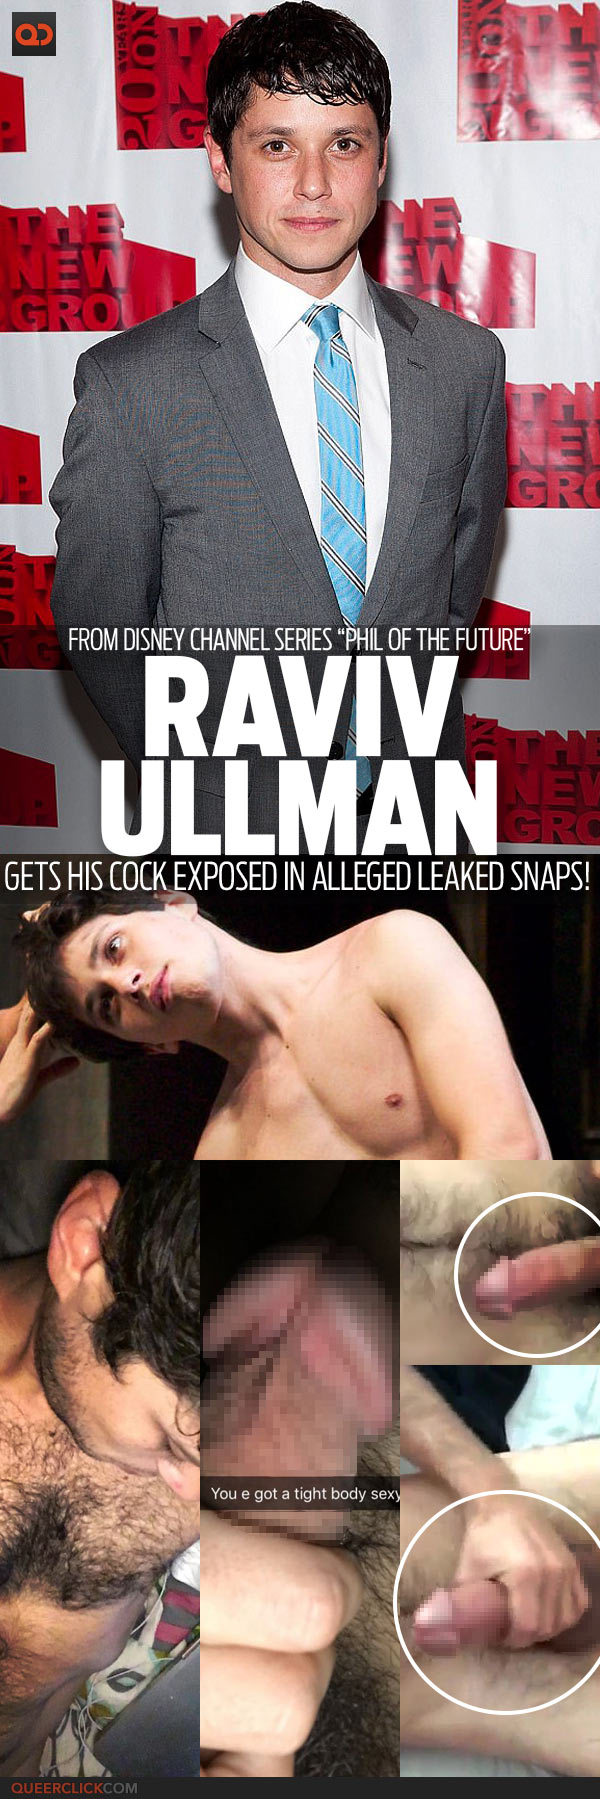 Raviv Ullman From Disney Channel Series Phil Of The Future Gets His Cock Exposed In Alleged Leaked Snaps